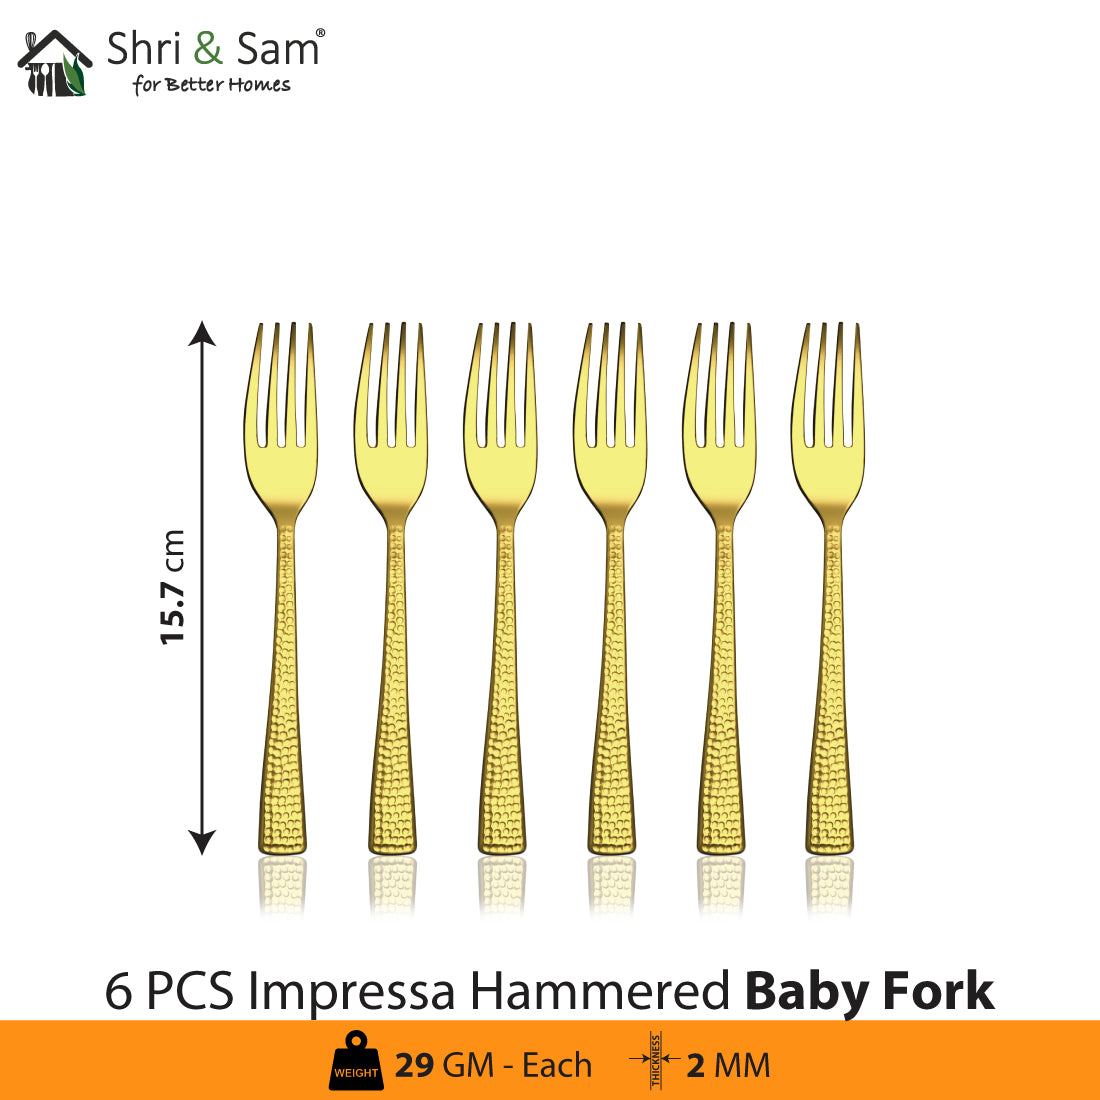 Stainless Steel Cutlery Impressa Hammered with Gold PVD Coating